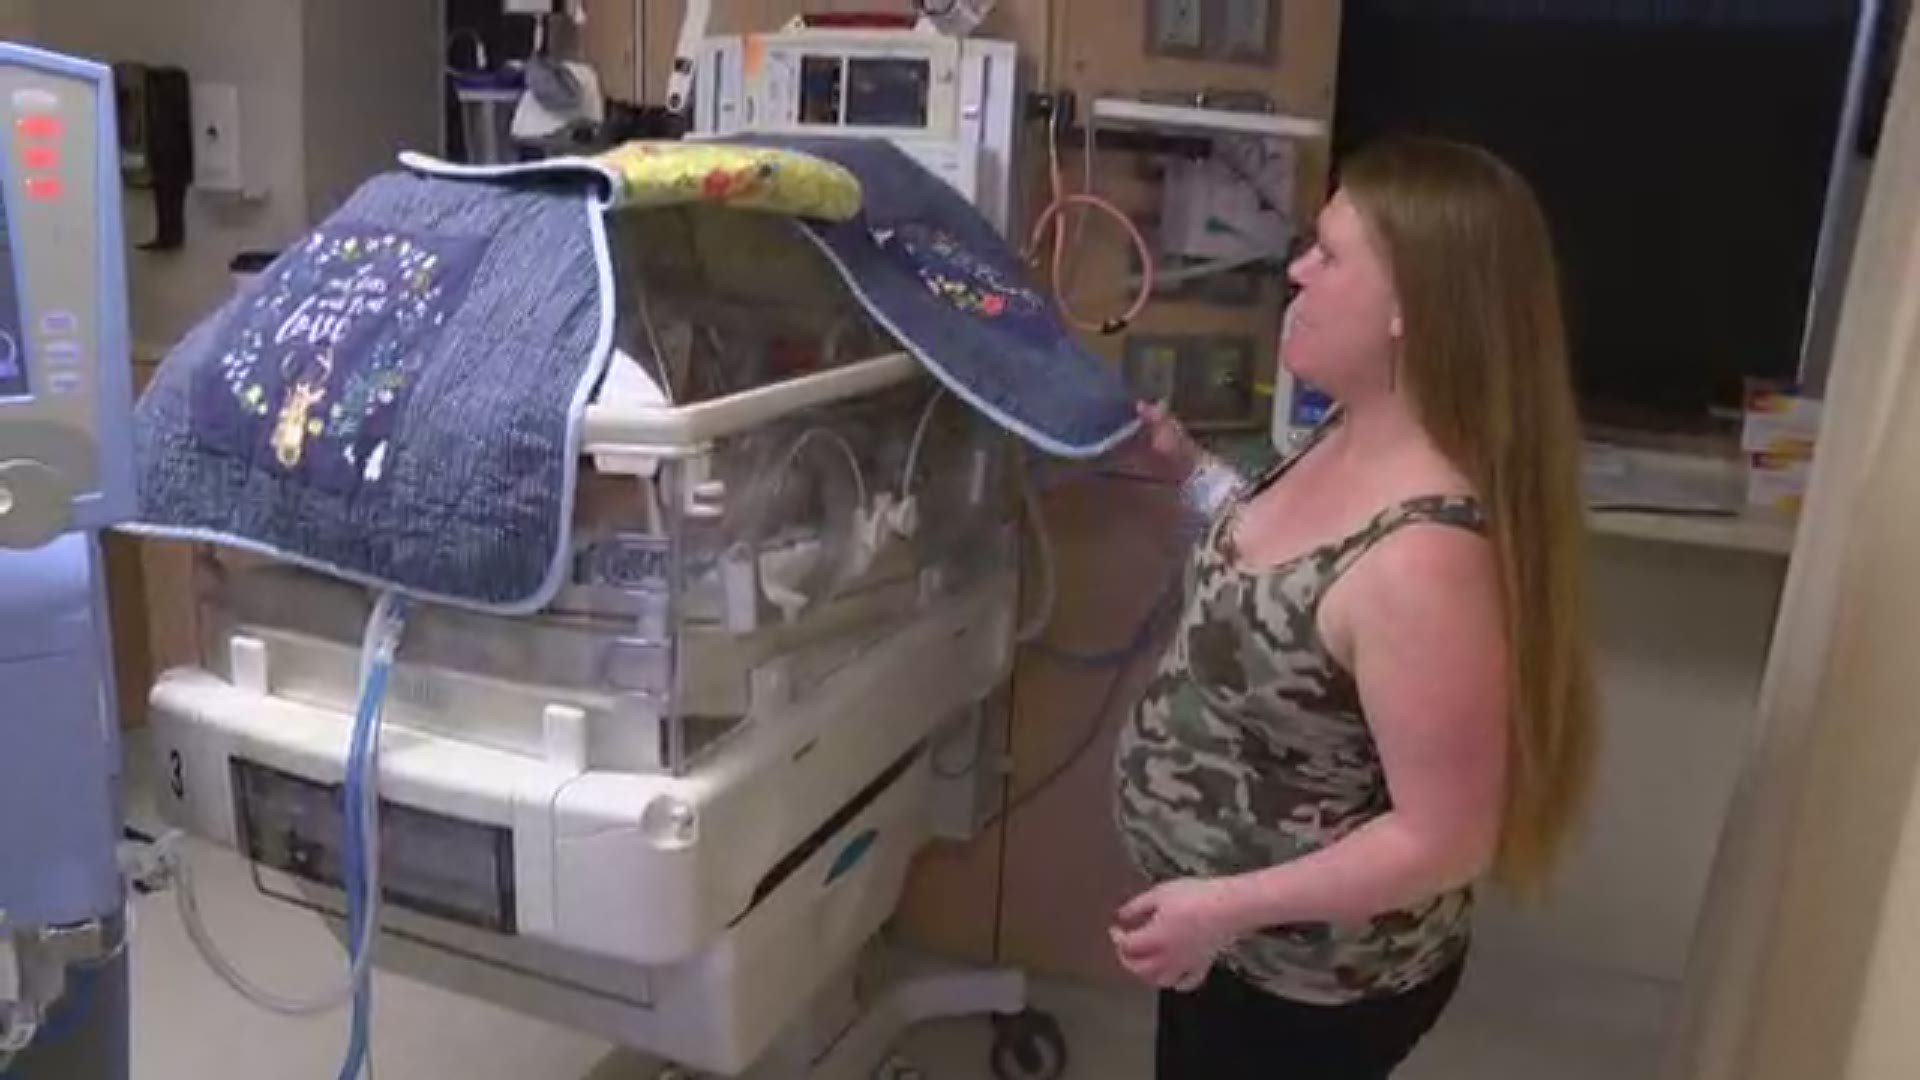 The woman gave birth at Christus Good Shepherd in Longview. Doctors say this is a very rare occurrence.